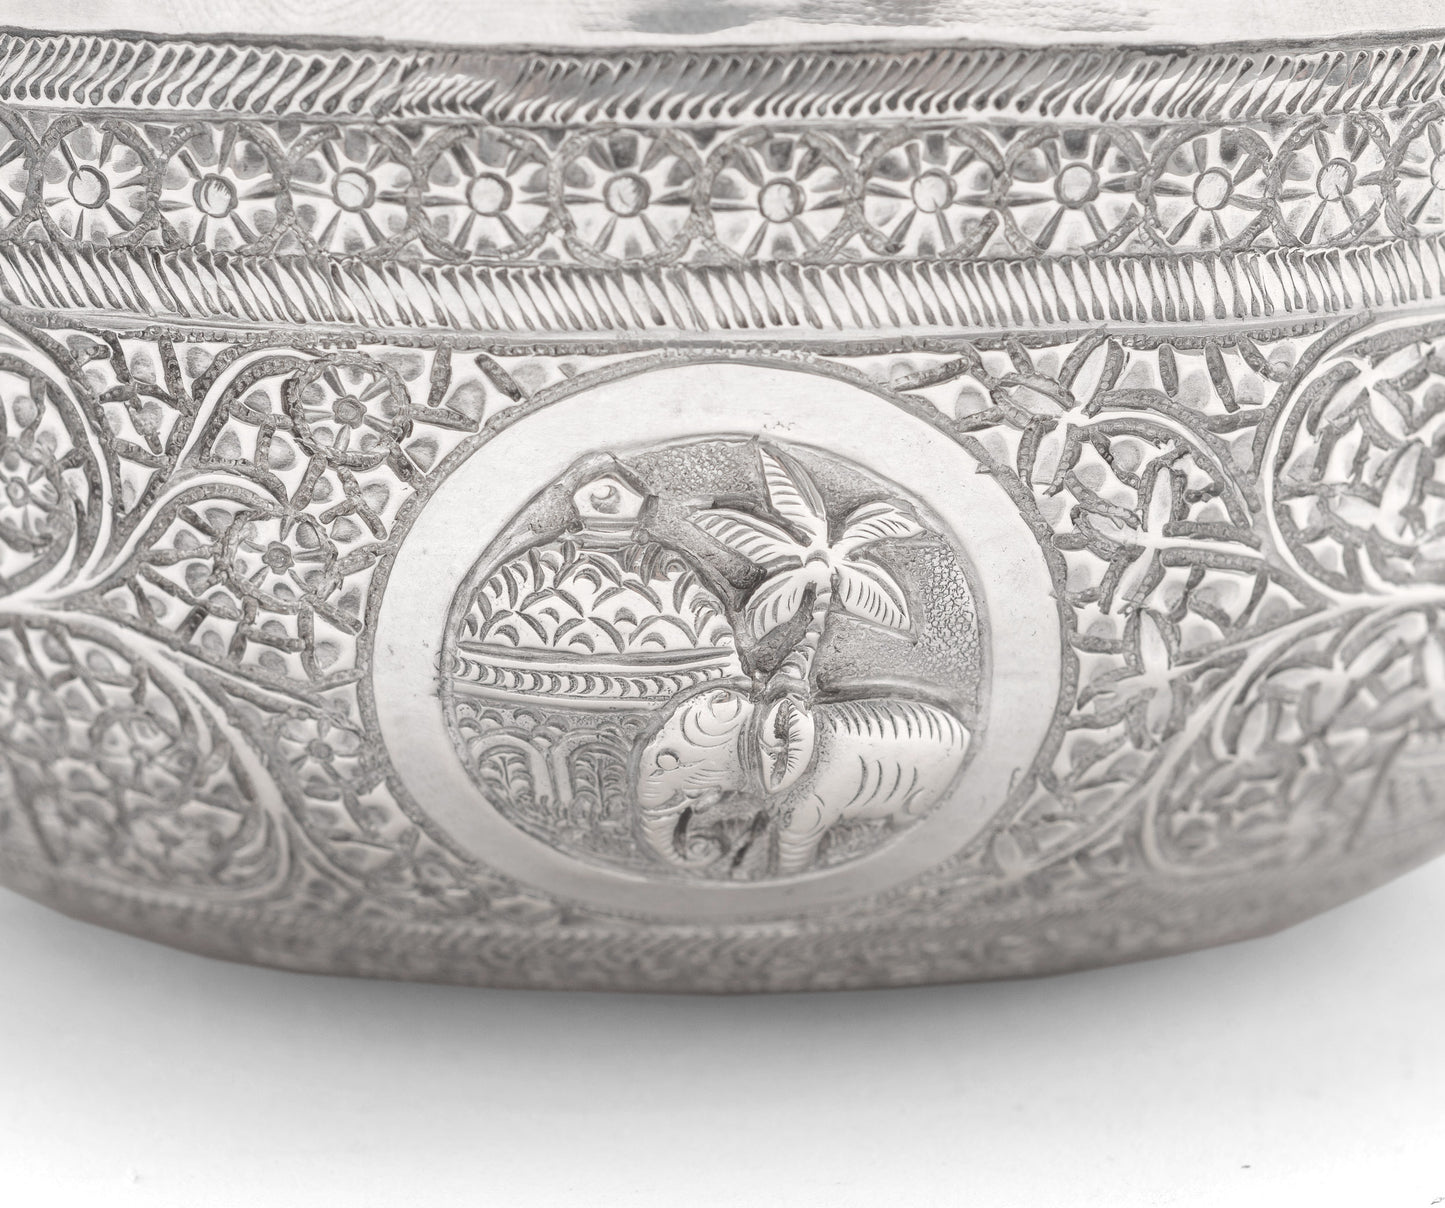 Antique Ceylonese (Sri Lankan) White Metal/Silver Offering Bowl with Elephants (Code 2116)